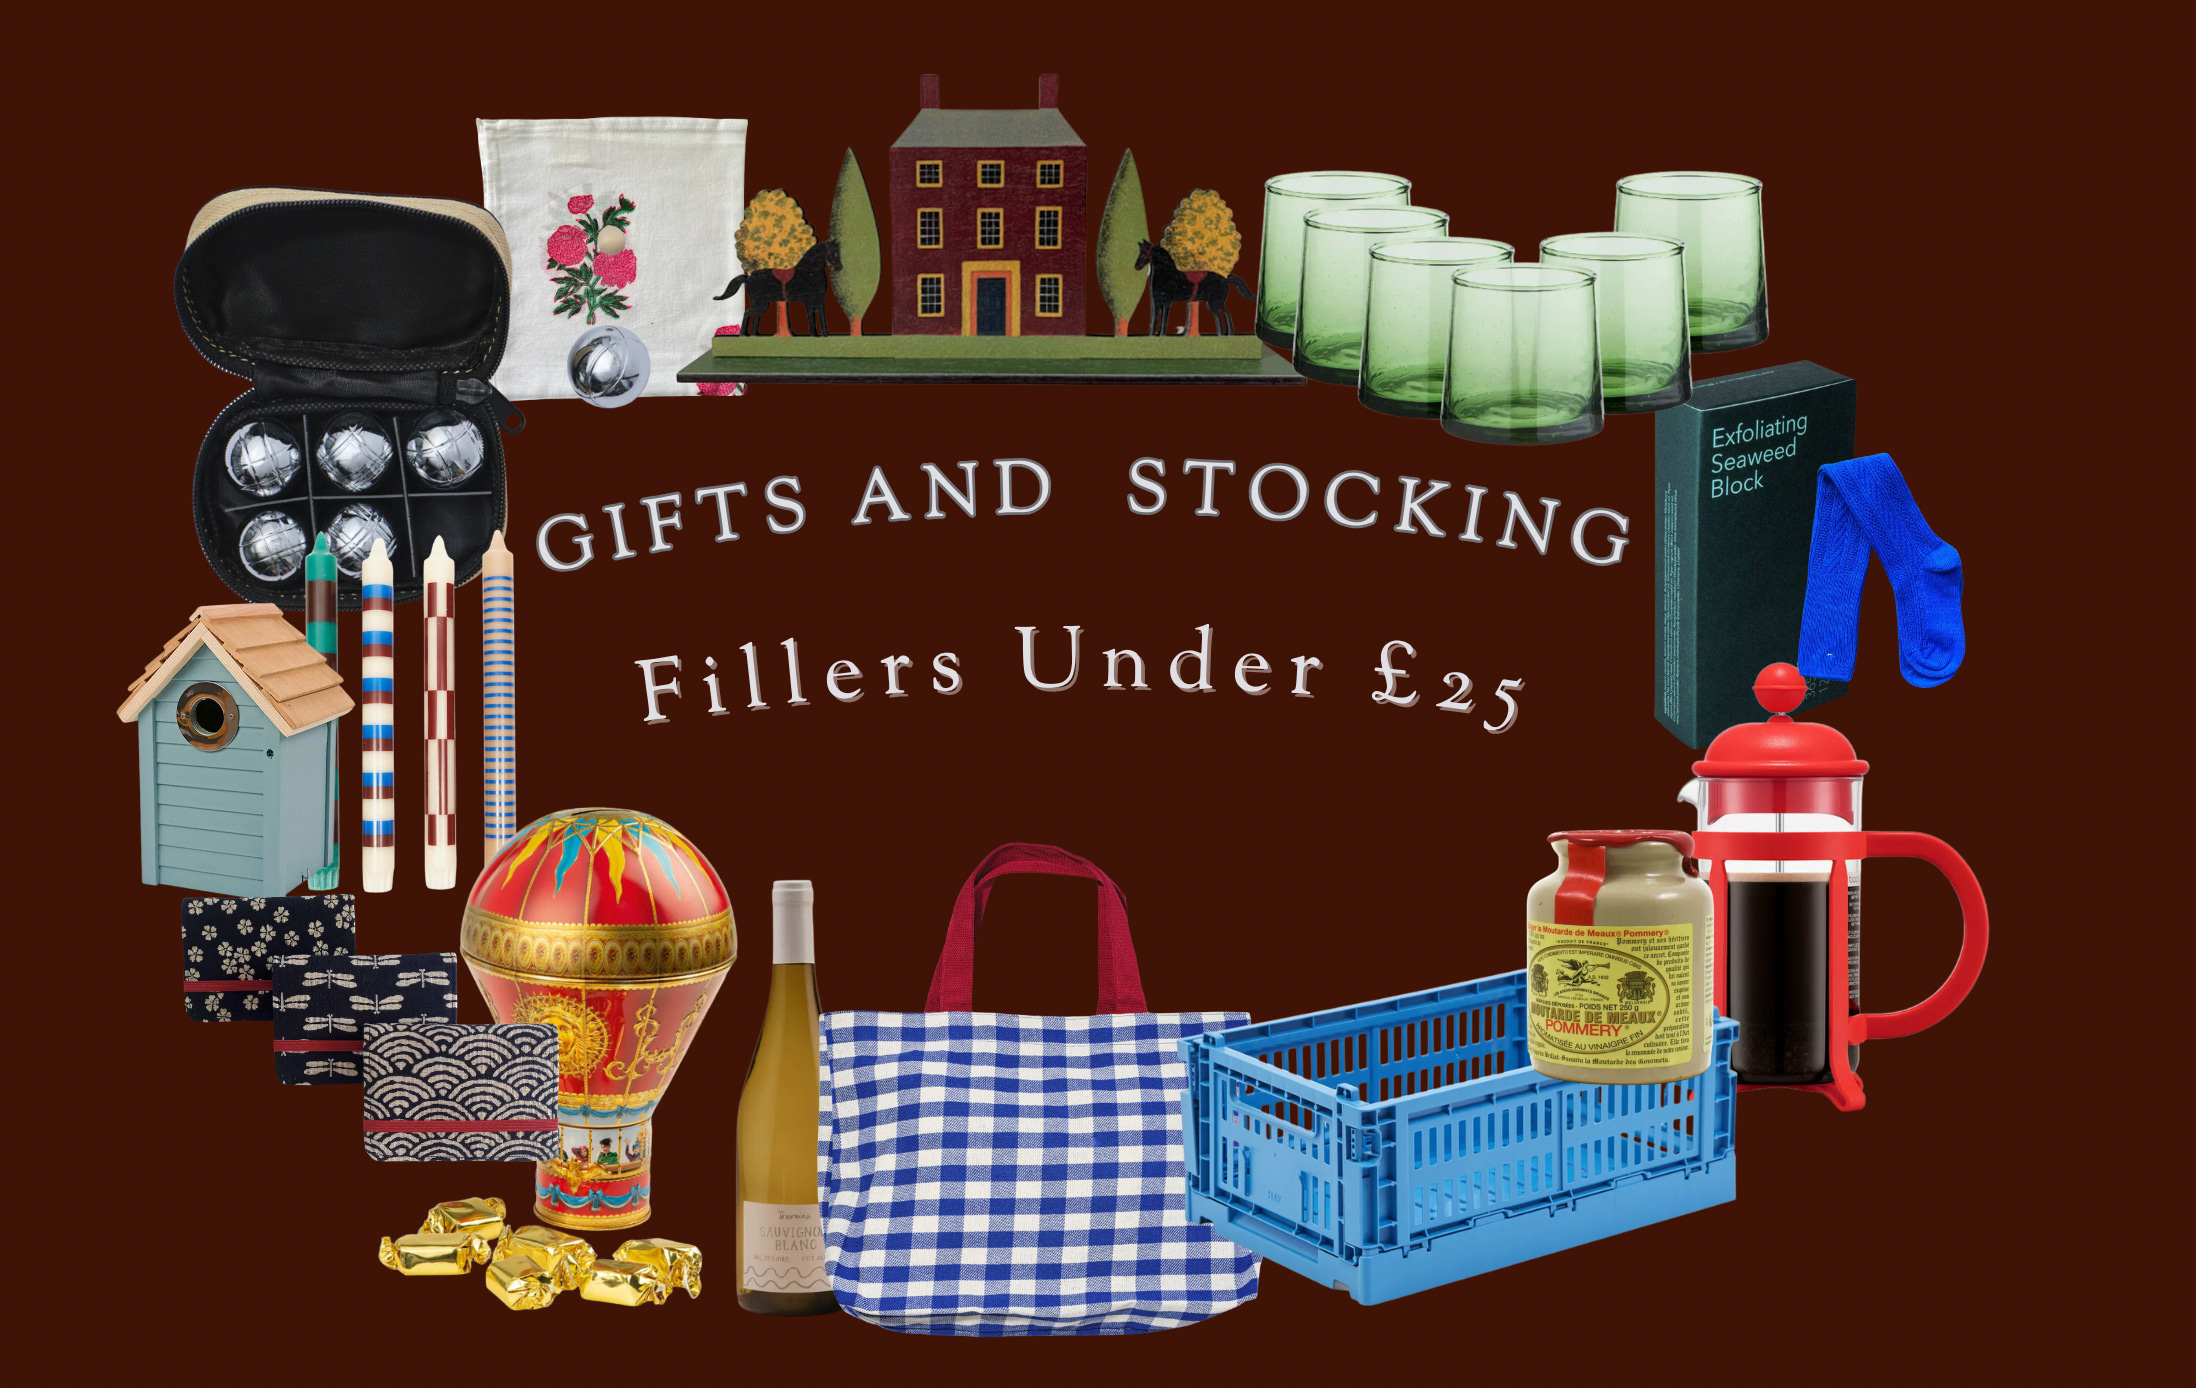 Gifts & Stocking Fillers For Under £25 - by Tat London